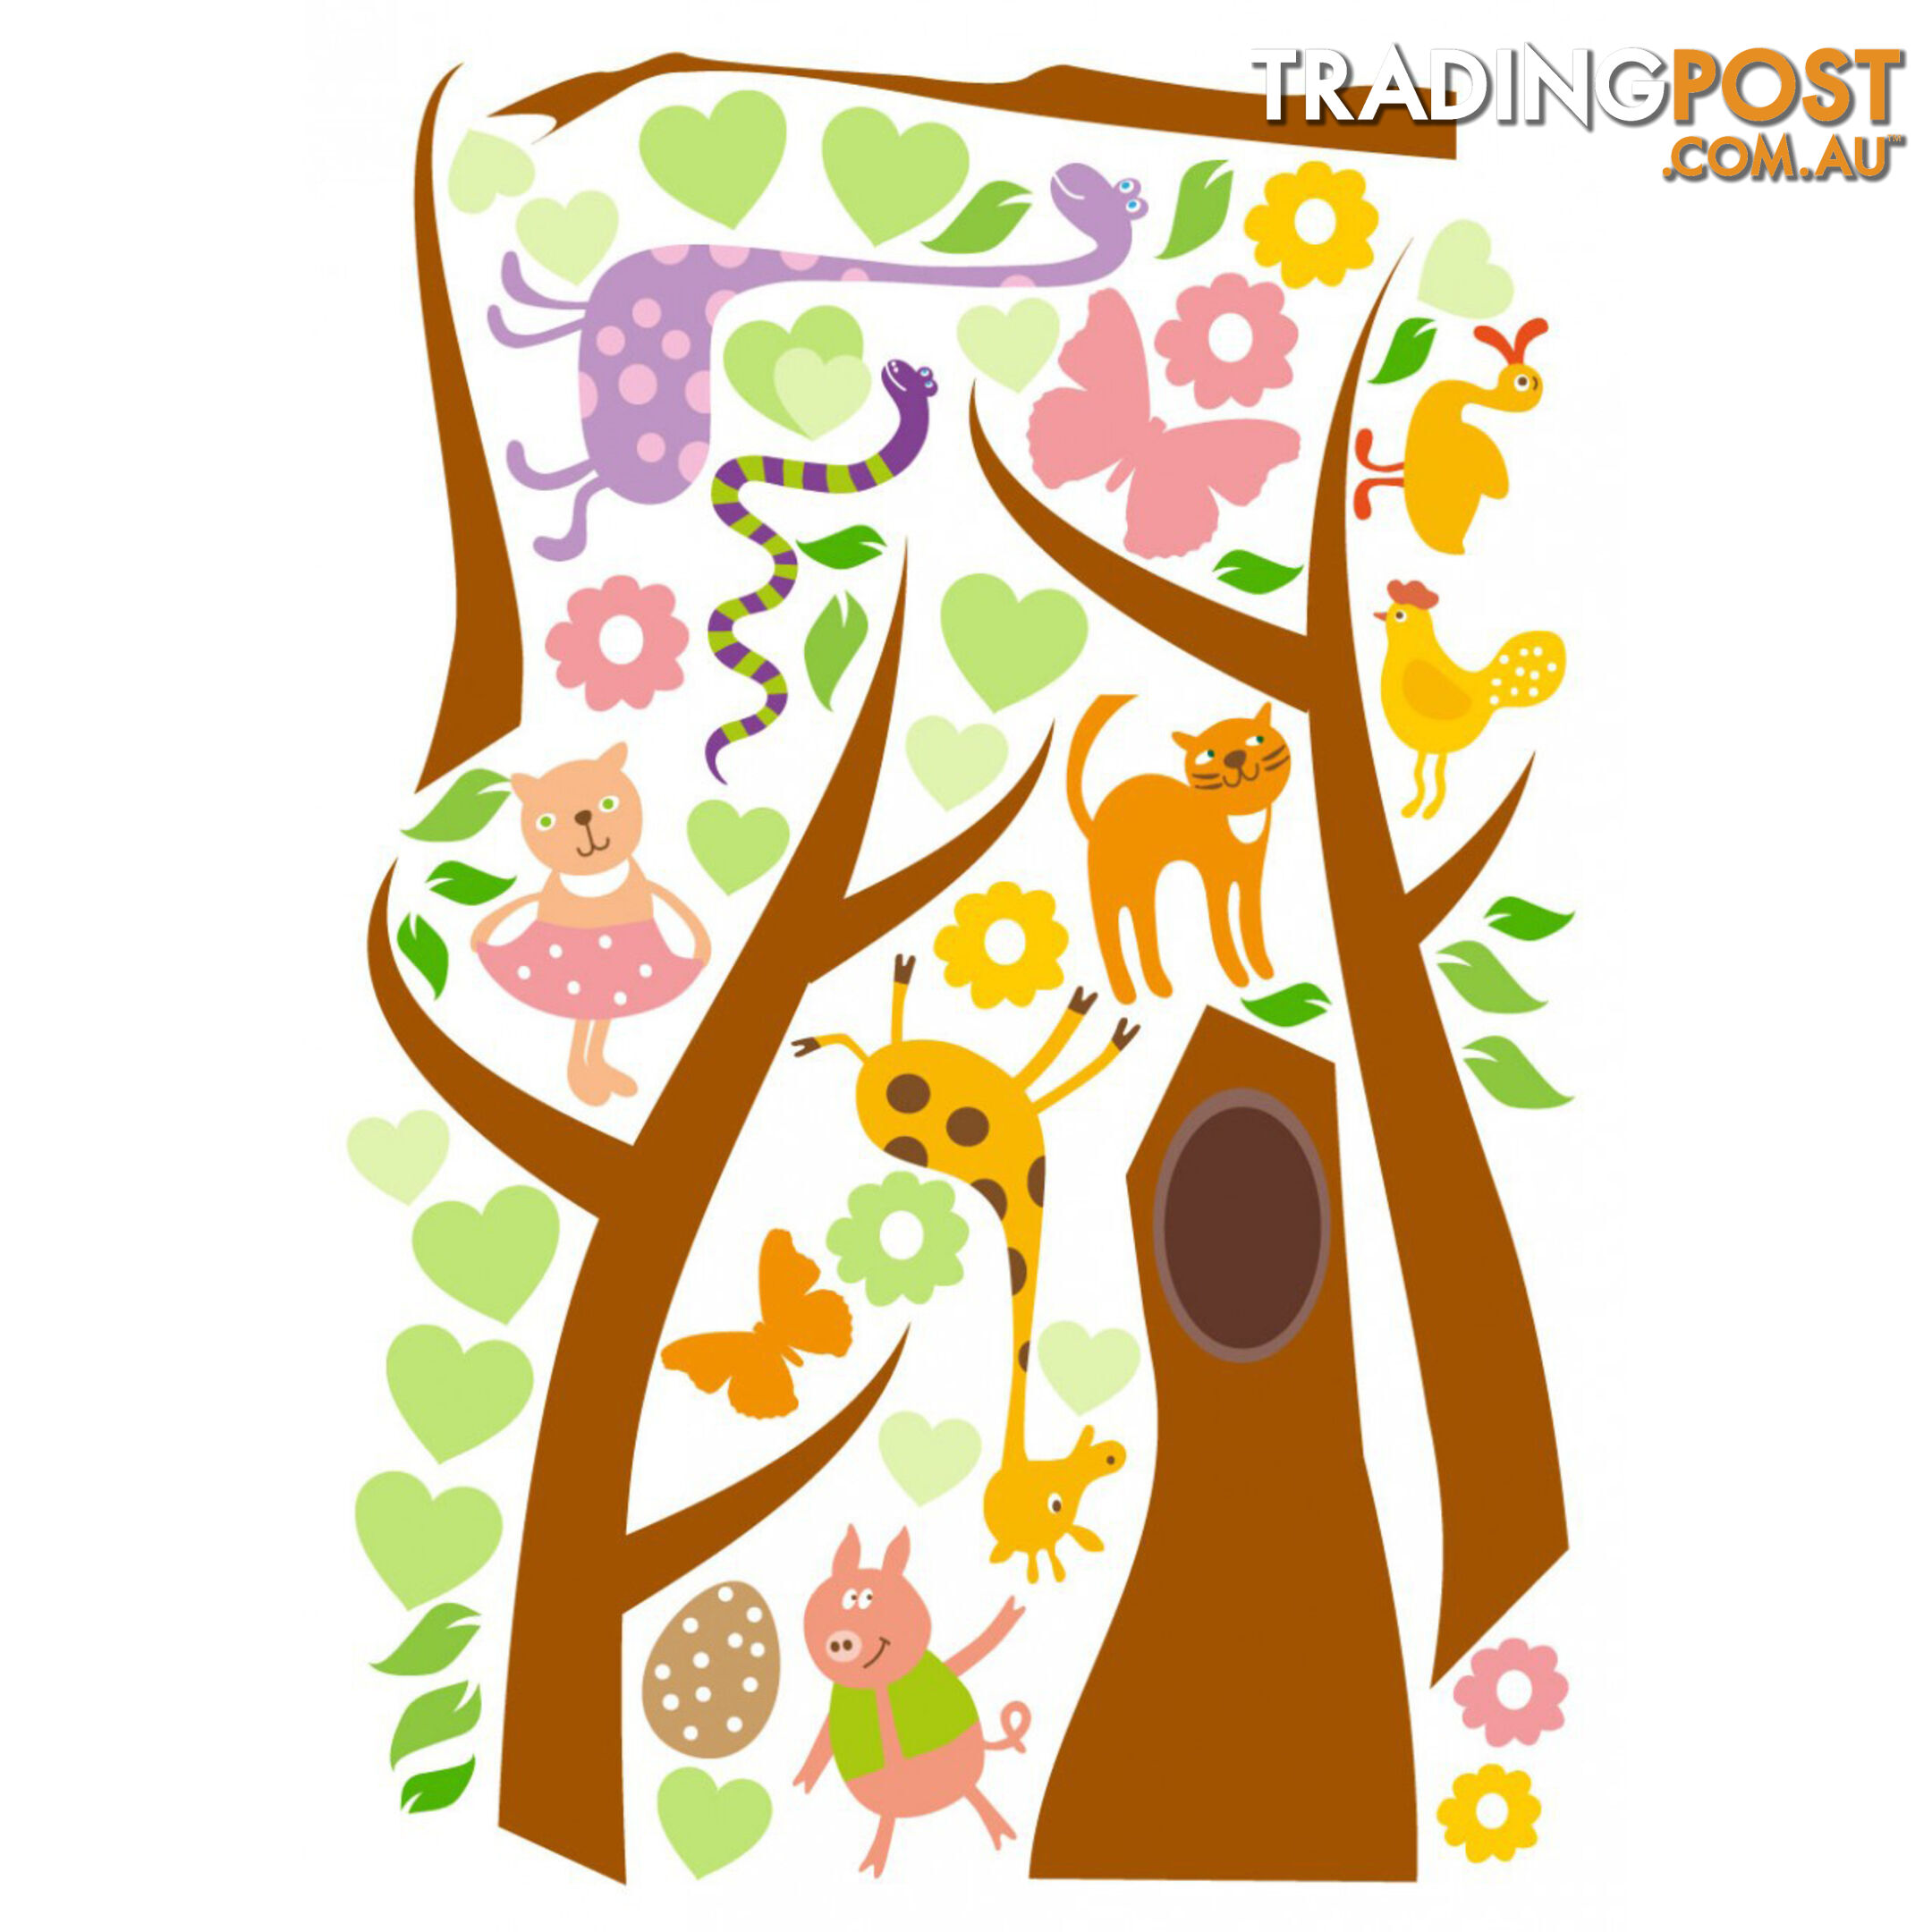 Tree with Cute Animals Wall Stickers - Totally Movable